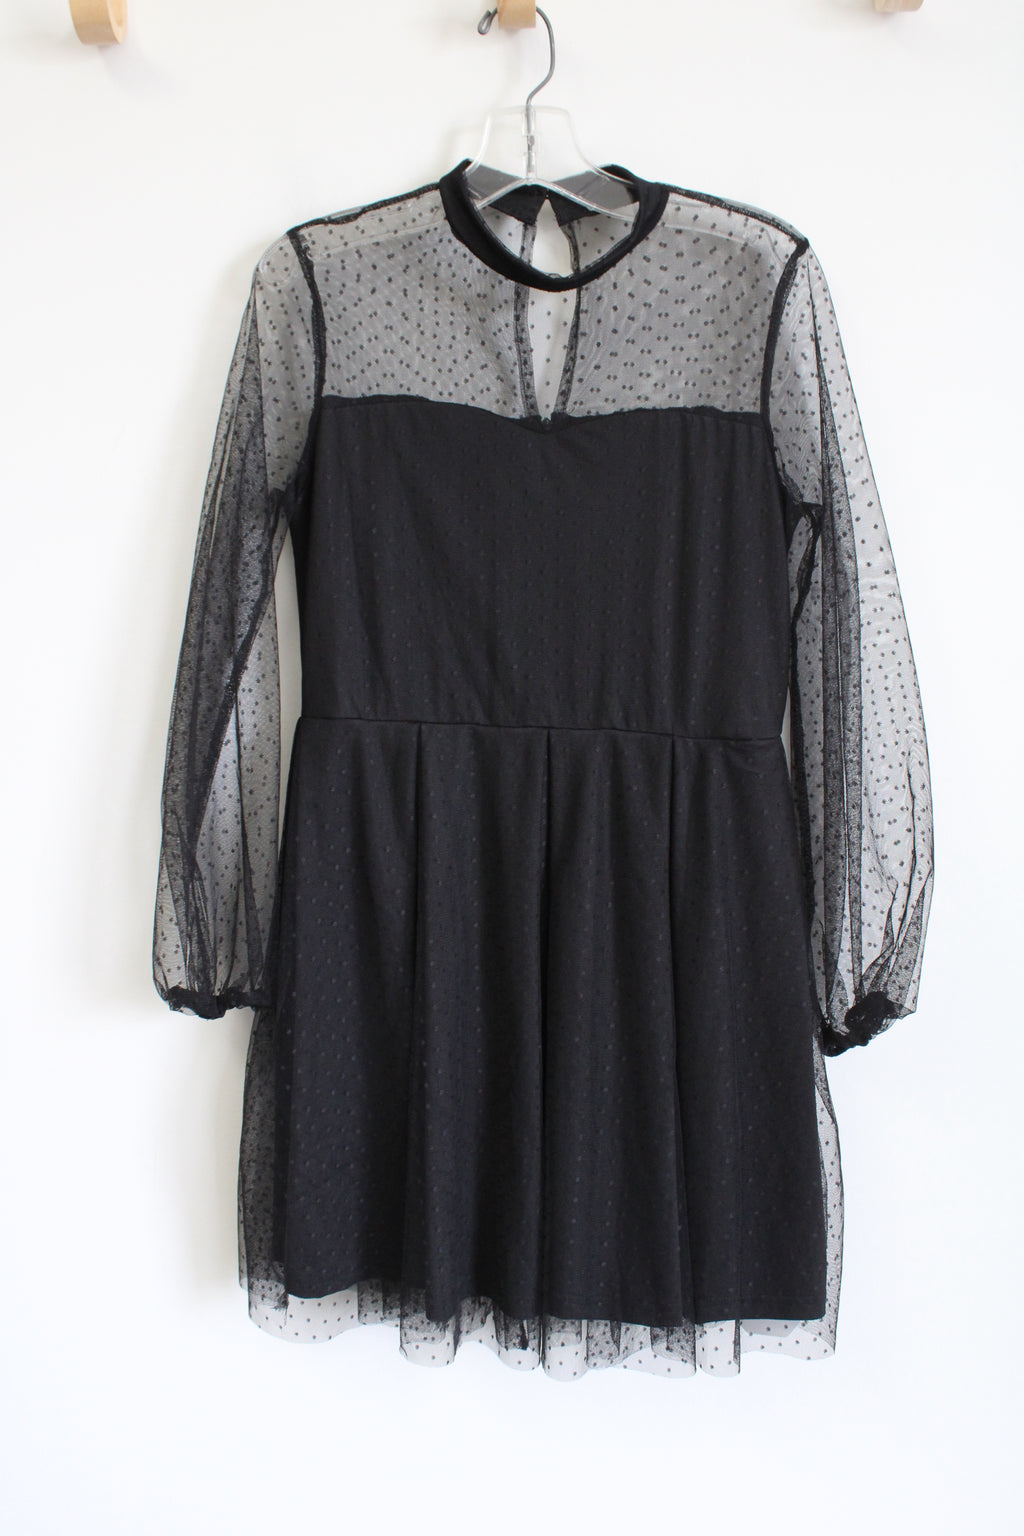 NEW Soly Hux Black Tulle Long Sleeved Dress | 11/12